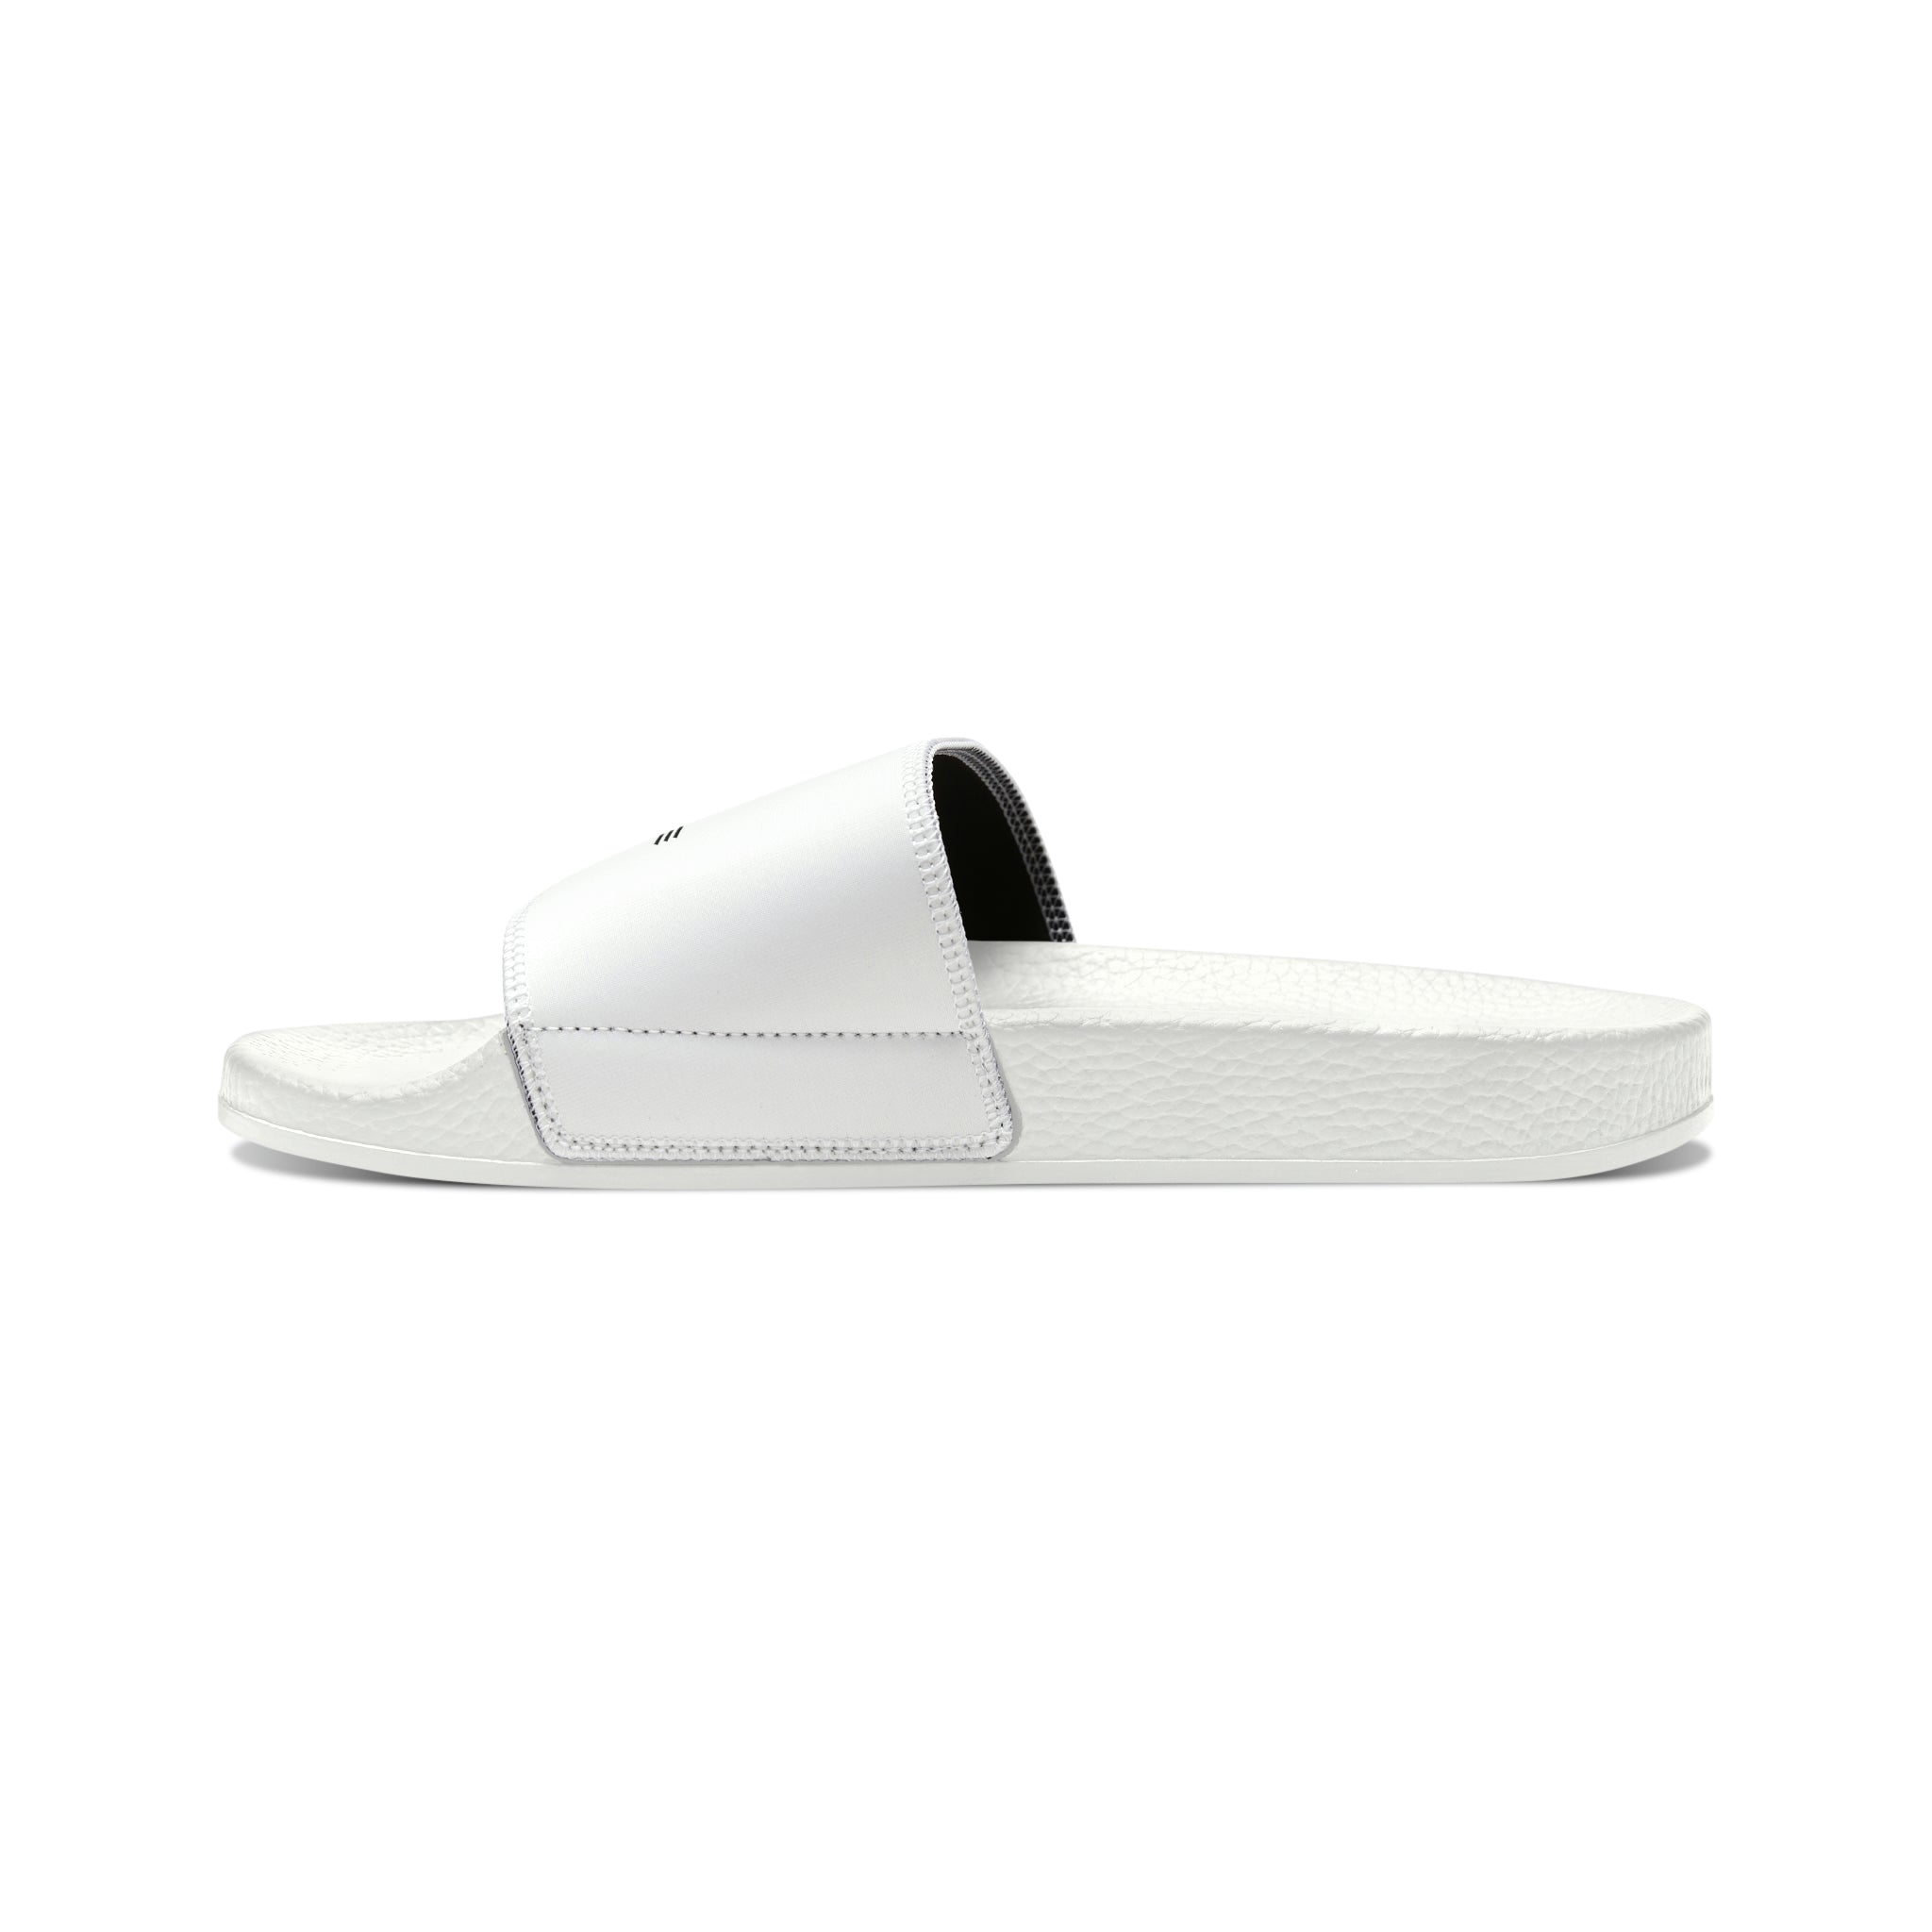 Zenith Youth Removable-Strap Sandals Anacotte